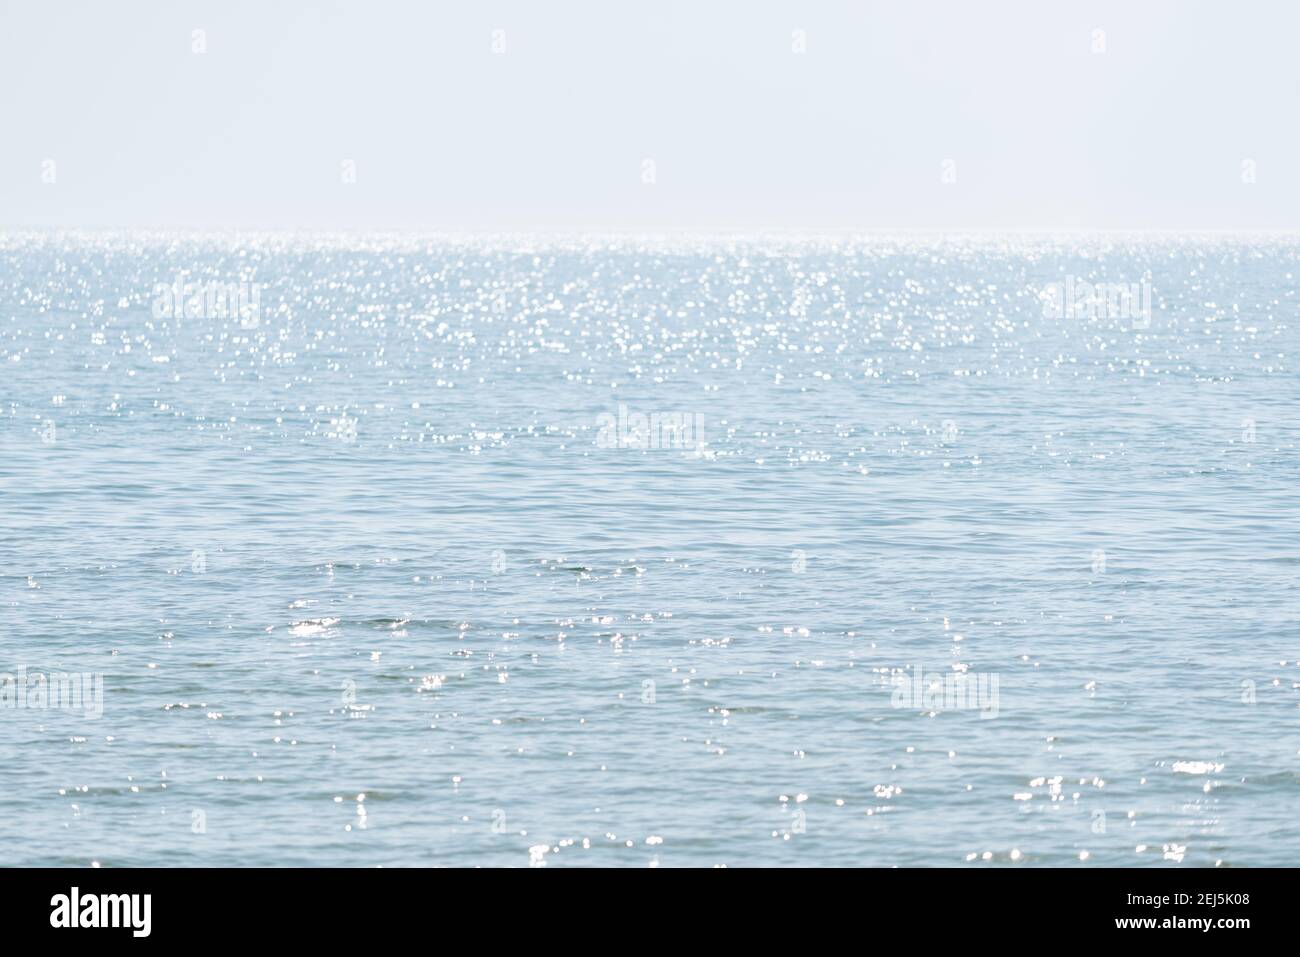 Abstract minimalistic natural background with blue sea water, highlights and ripples Stock Photo